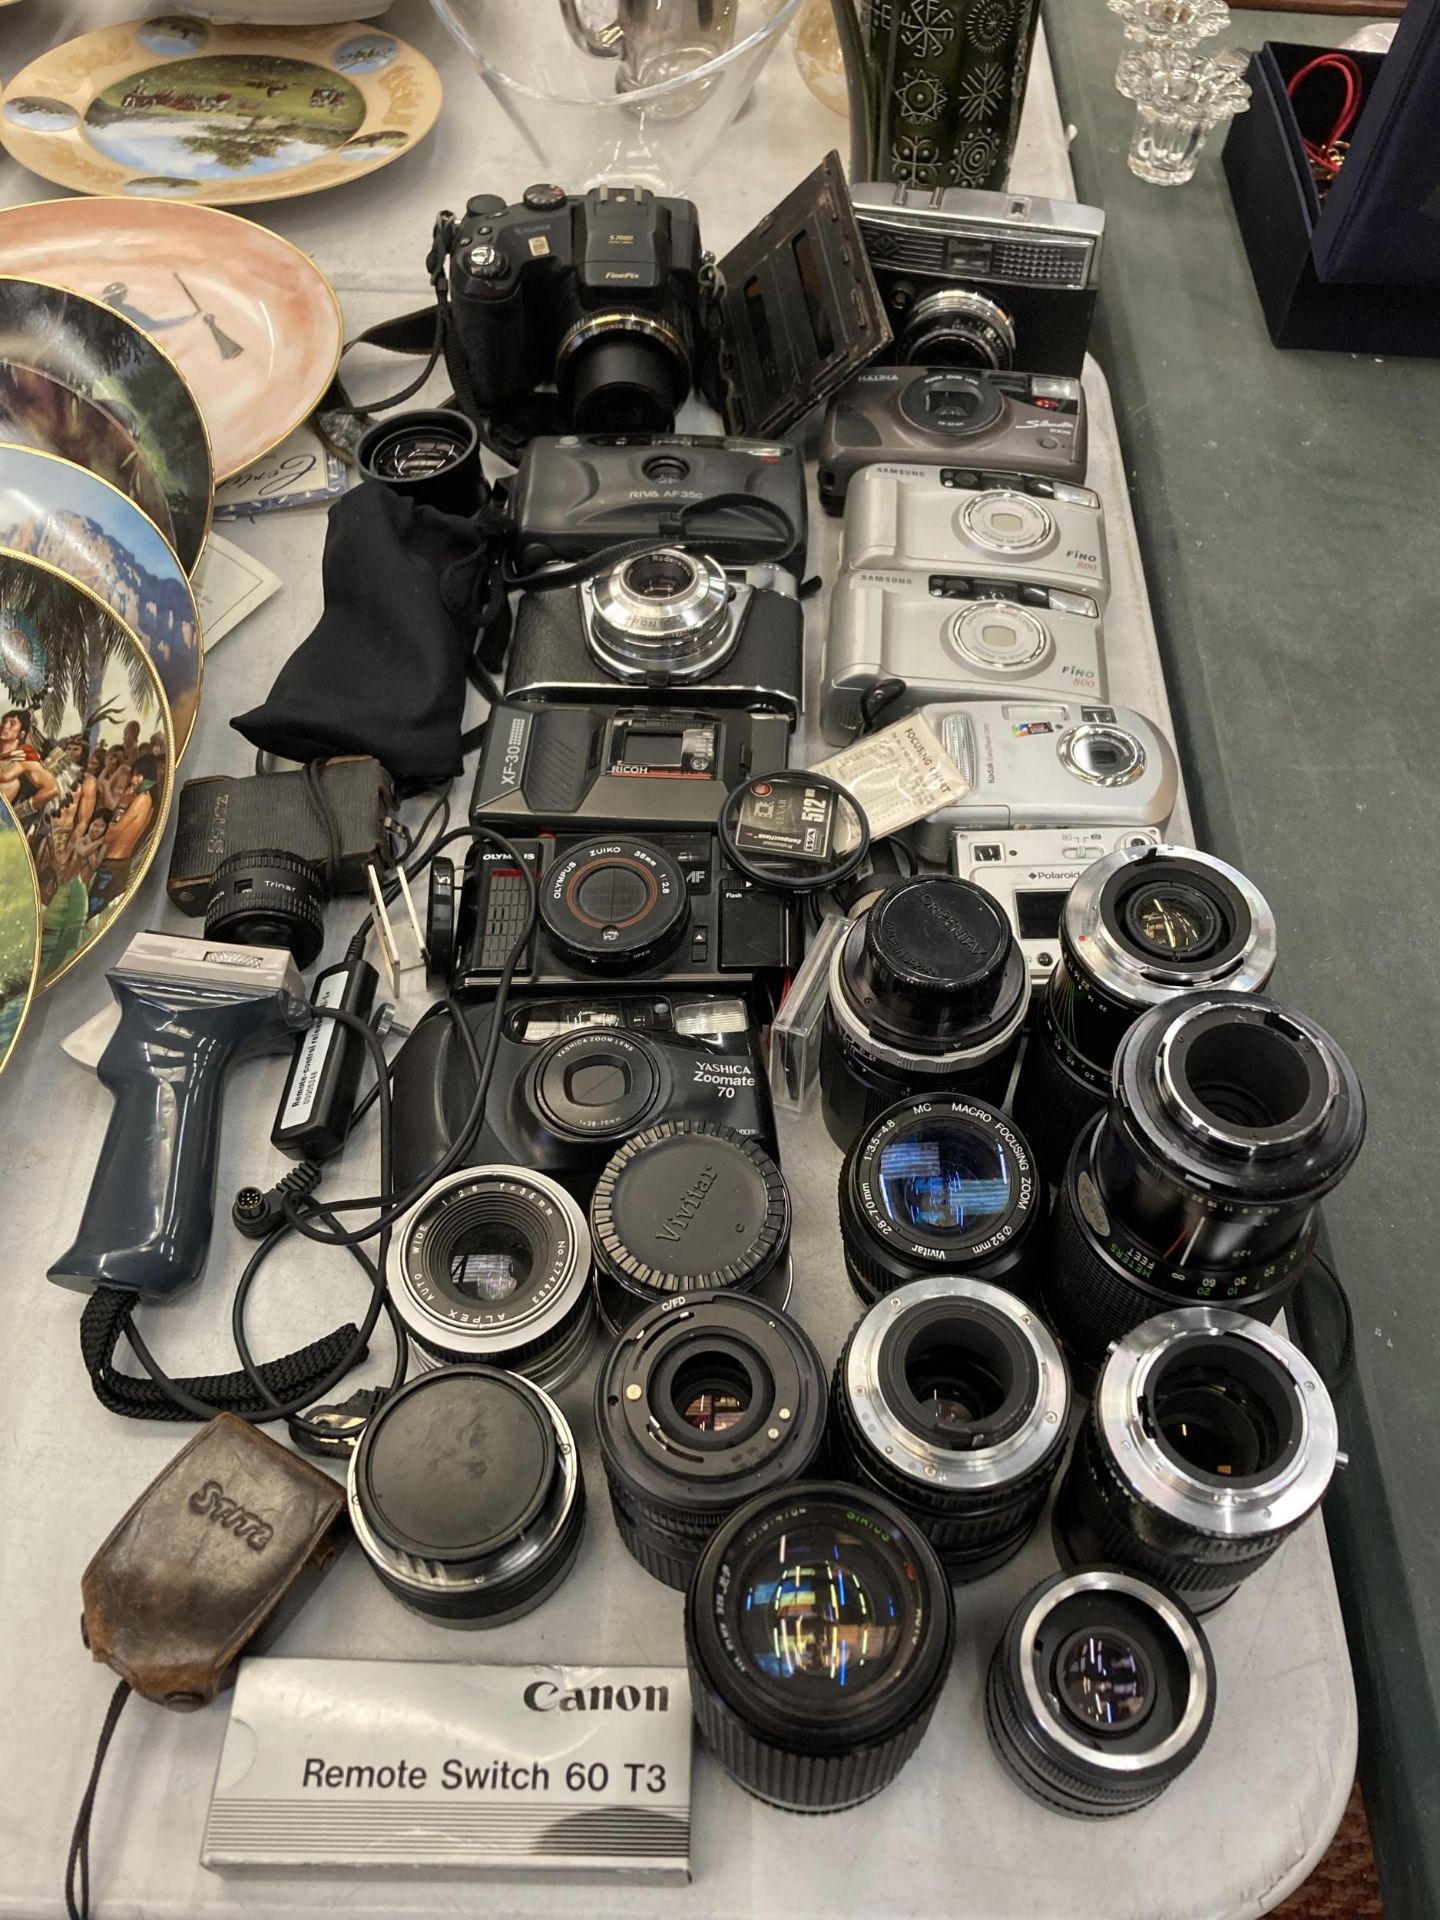 A COLLECTION OF CAMERAS TO INCLUDE A FUJIFILM S7000, RICOH, LENS' ETC